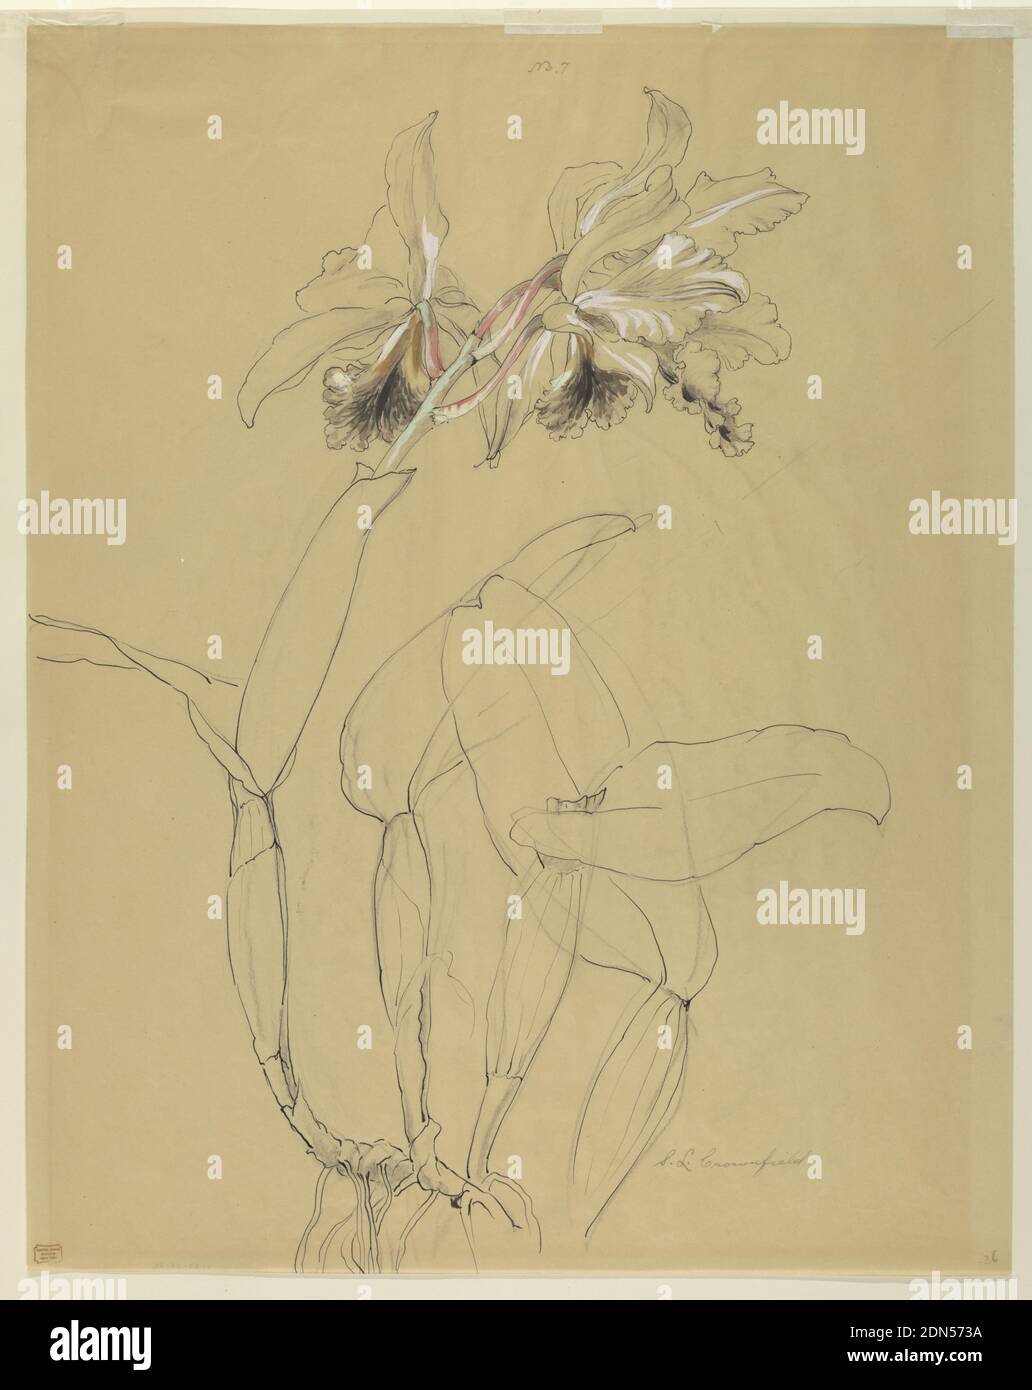 Study of an Orchid, Sophia L. Crownfield, (American, 1862–1929), Pen and ink, brush and gouache, graphite on tracing paper, Vertical sheet depicting an orchid with two blossoms. The flowers are paritally colored with black, white, green and pink gouache., USA, early 20th century, nature studies, Drawing Stock Photo